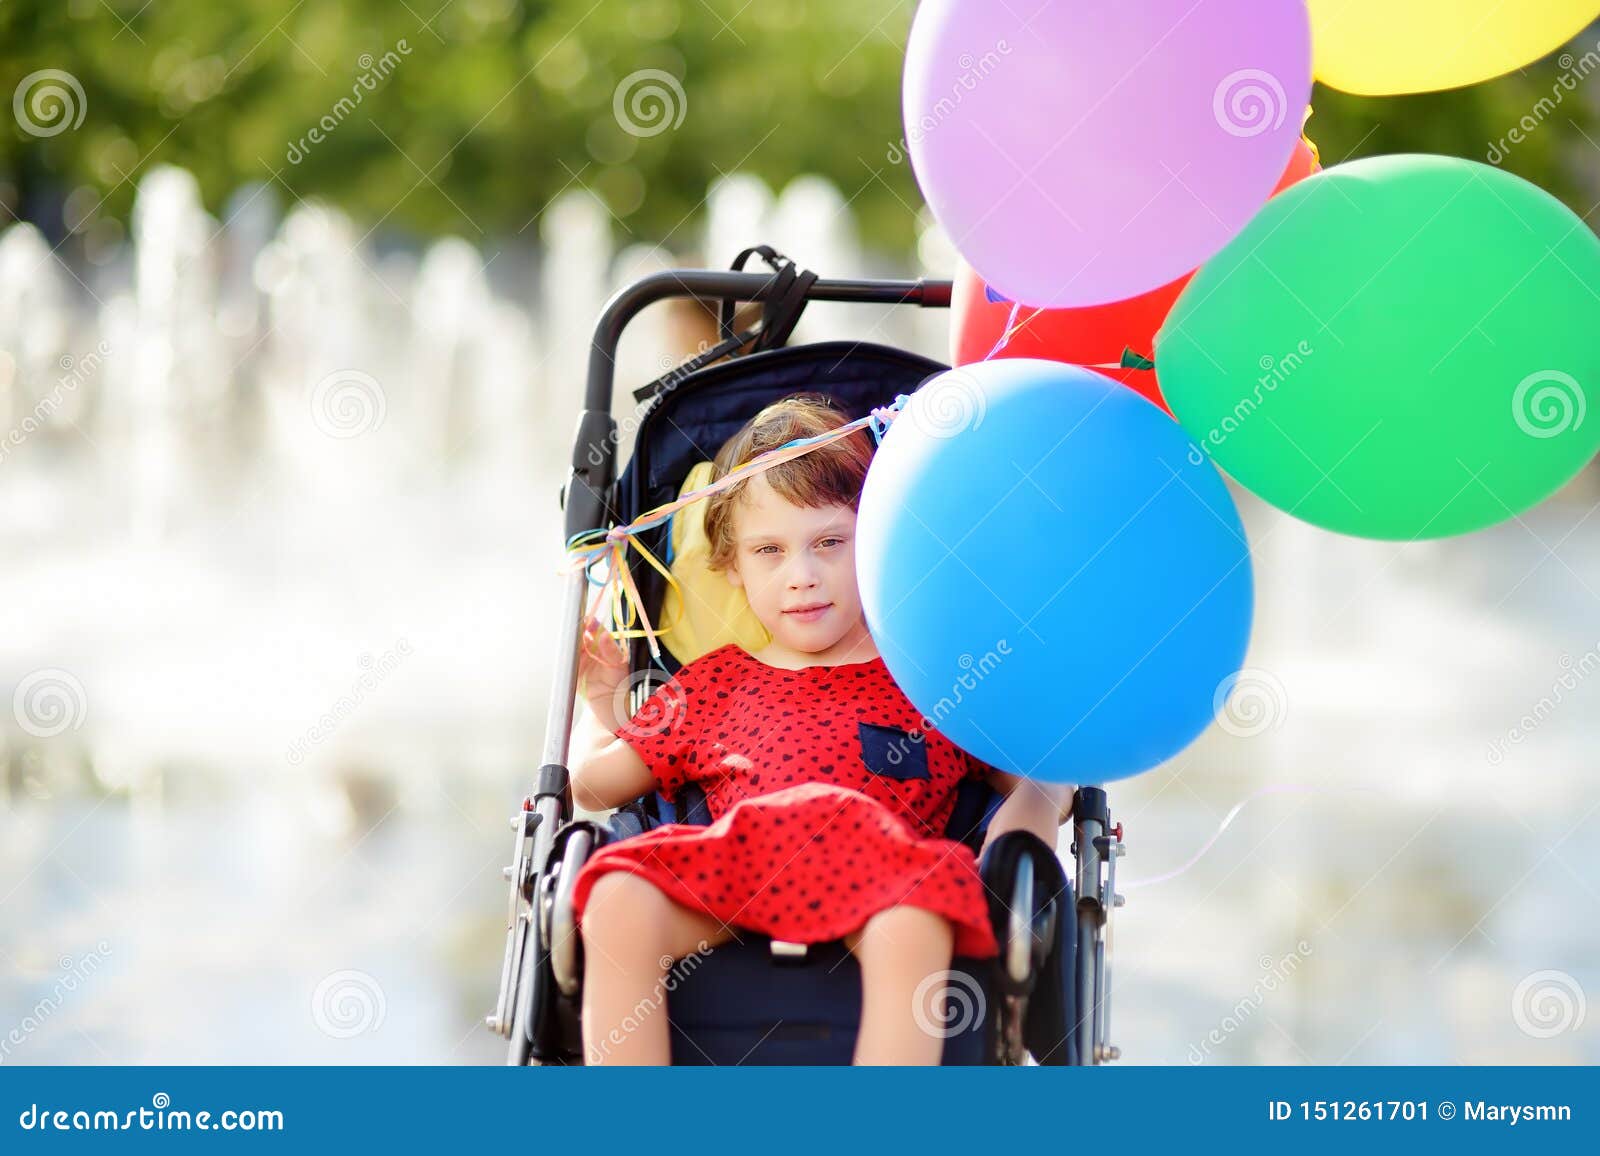 cute little disabled girl in a wheelchair celebrate birthday or walking in the park summer. child cerebral palsy. inclusion